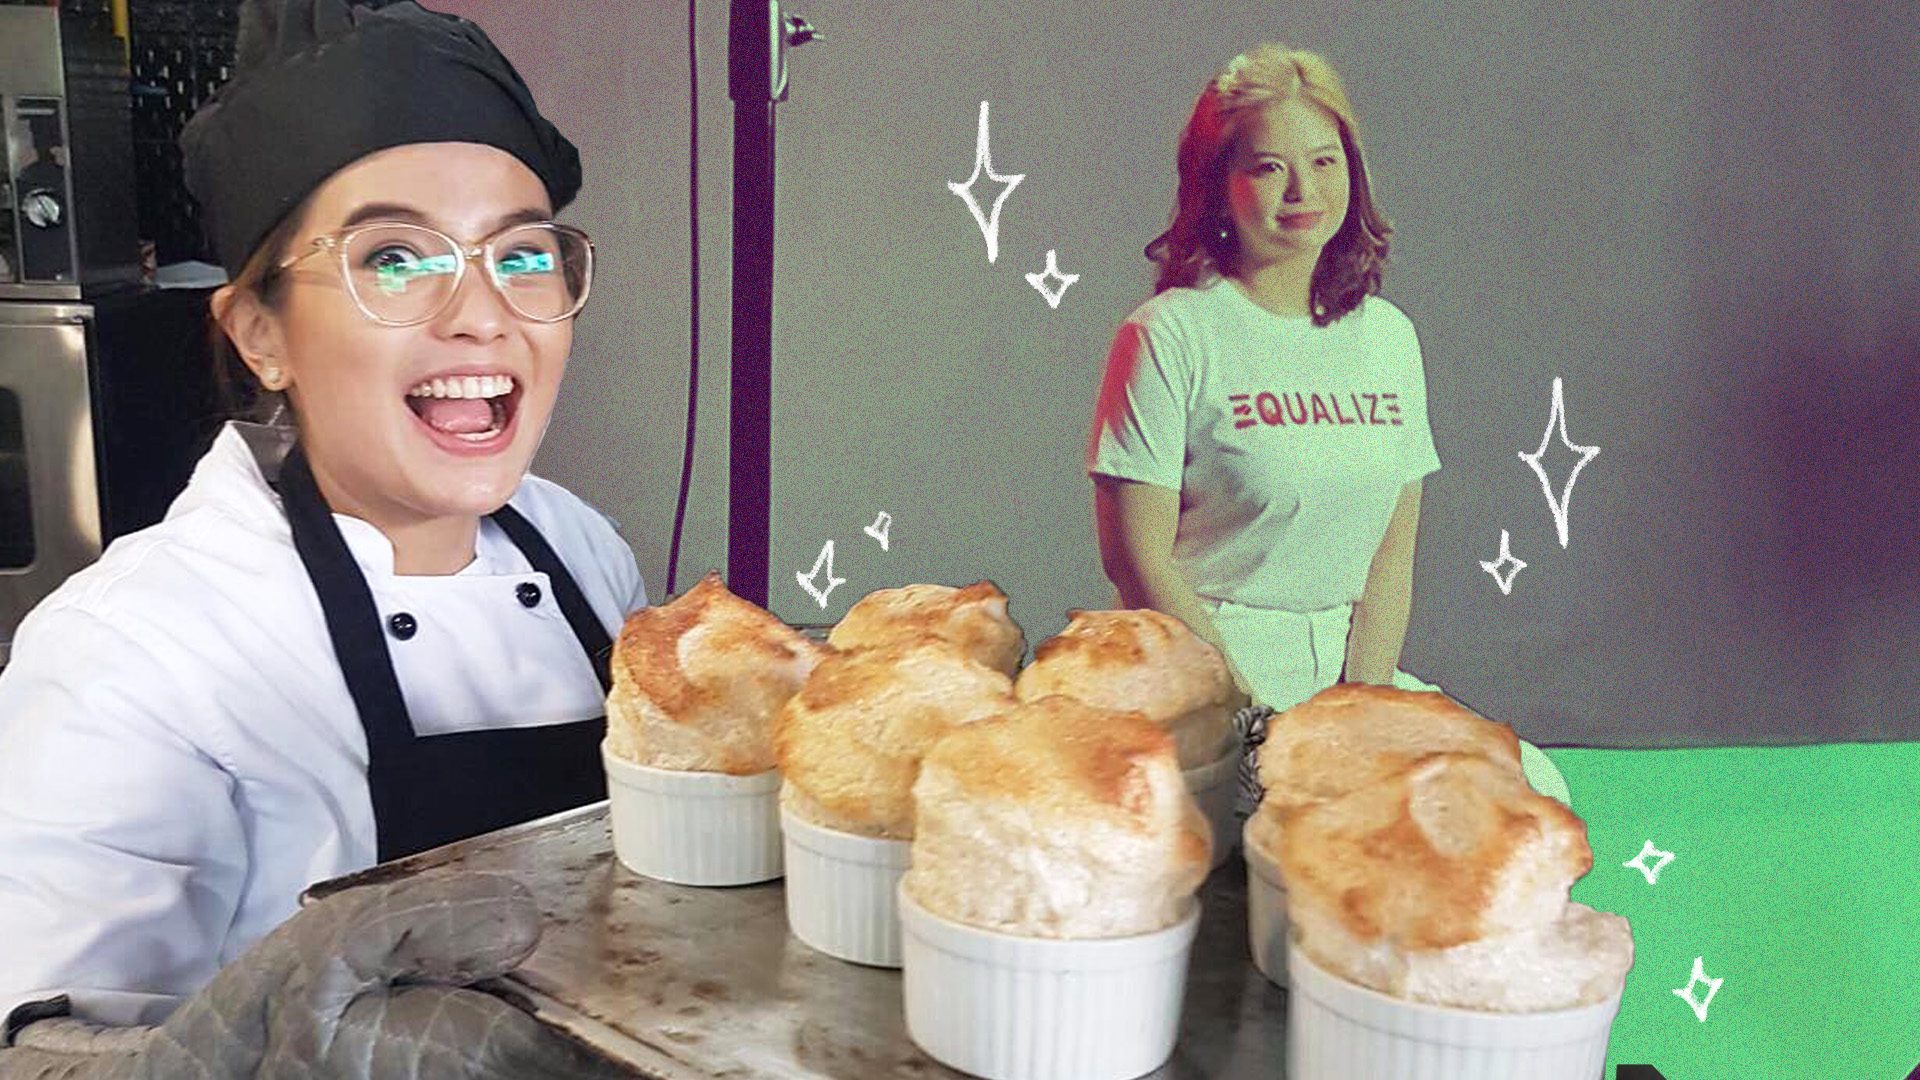 Artista by day, baker by night: How Bea Binene juggles her two passions every day